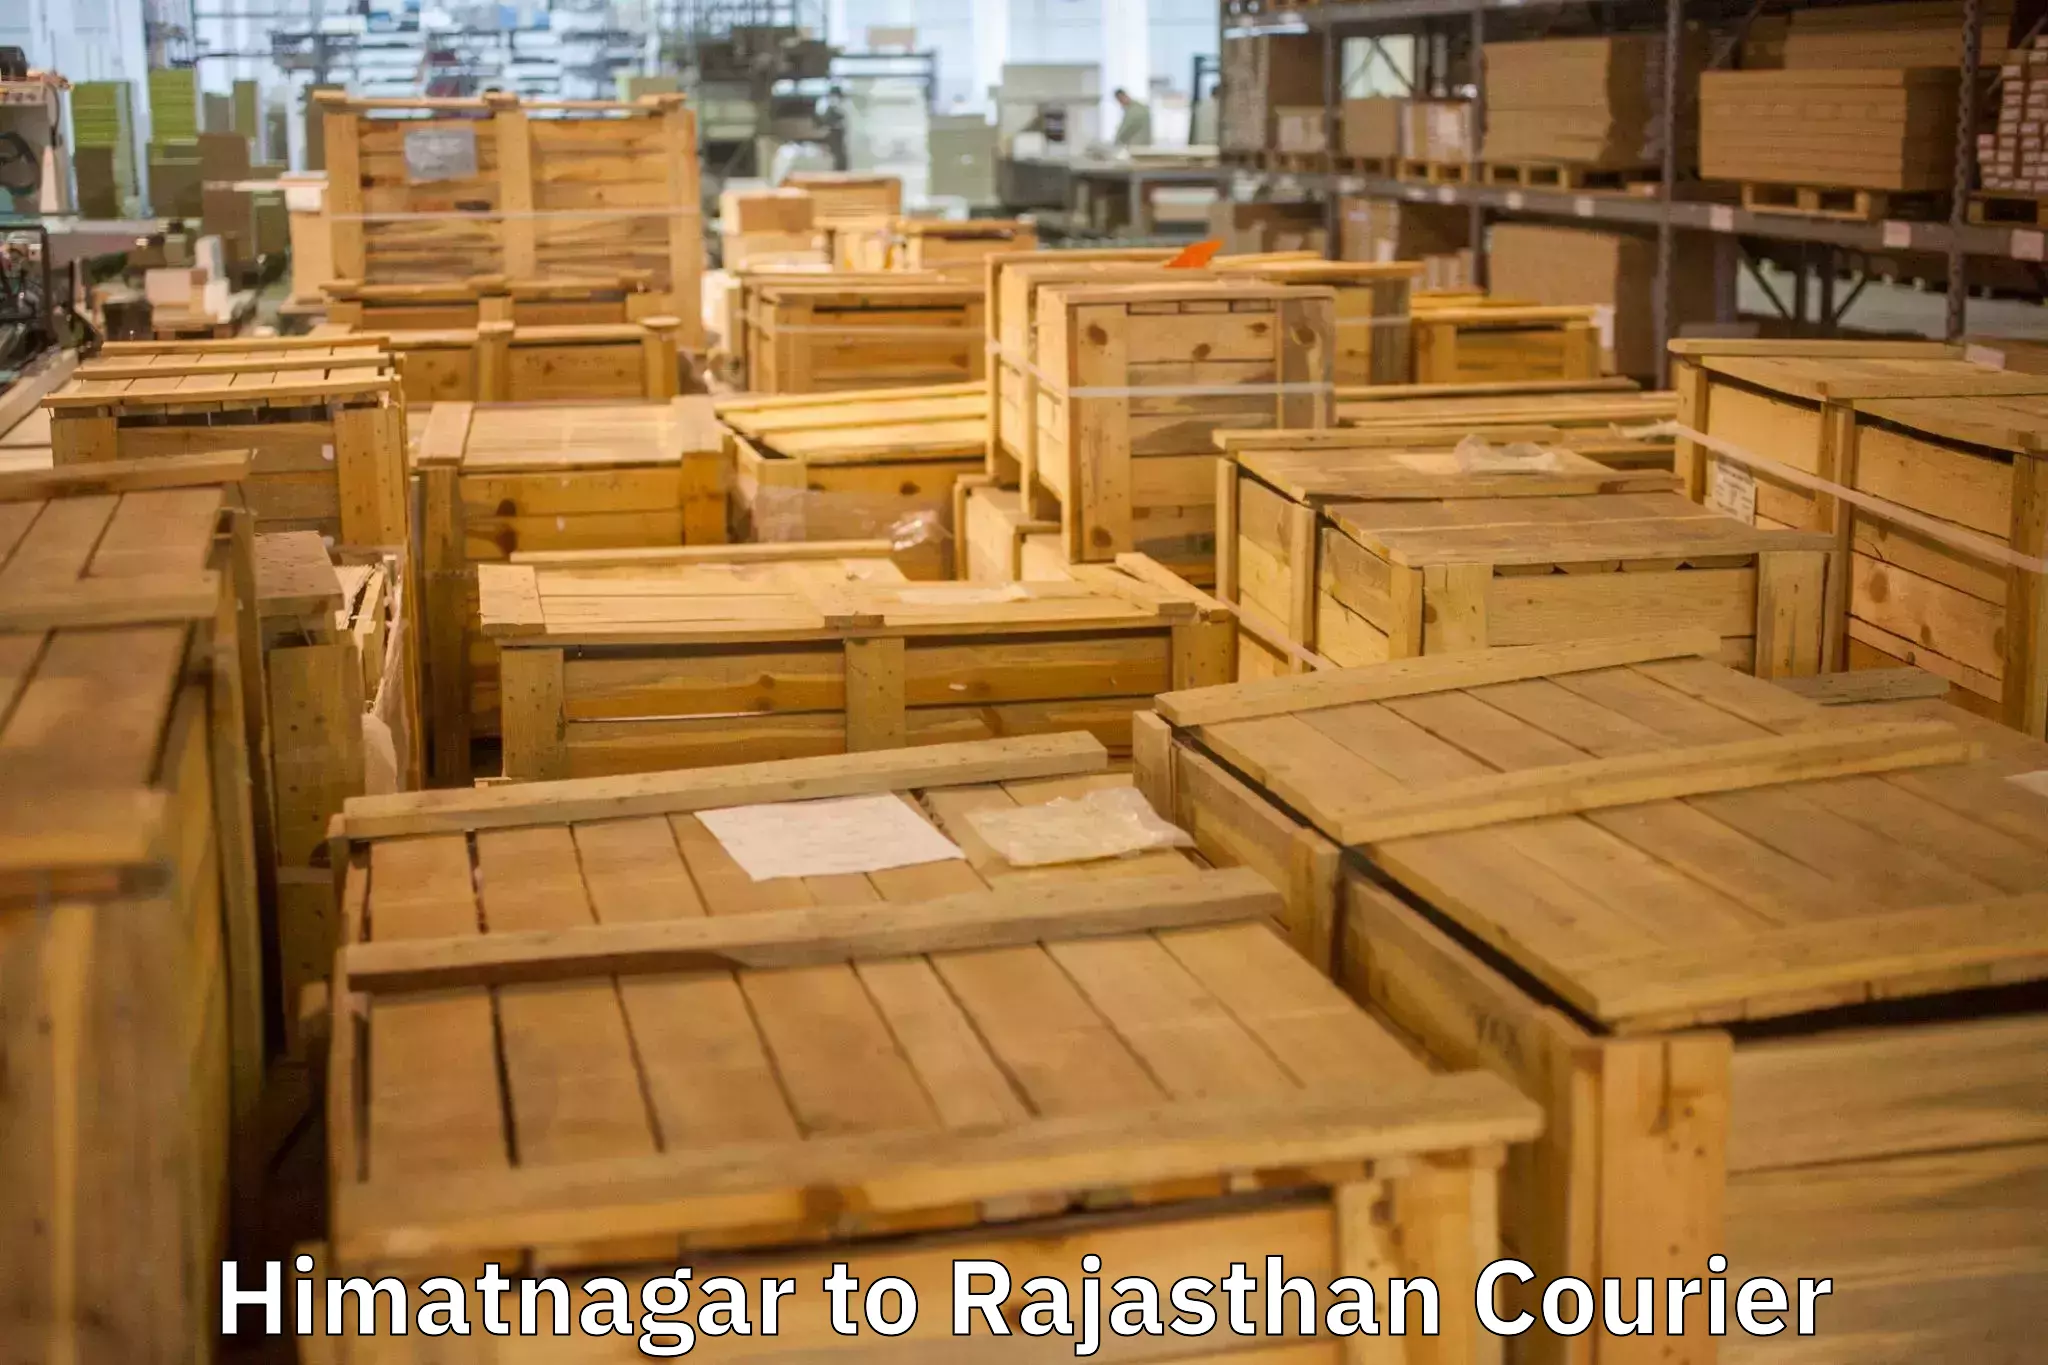 Hassle-free relocation in Himatnagar to Rajasthan